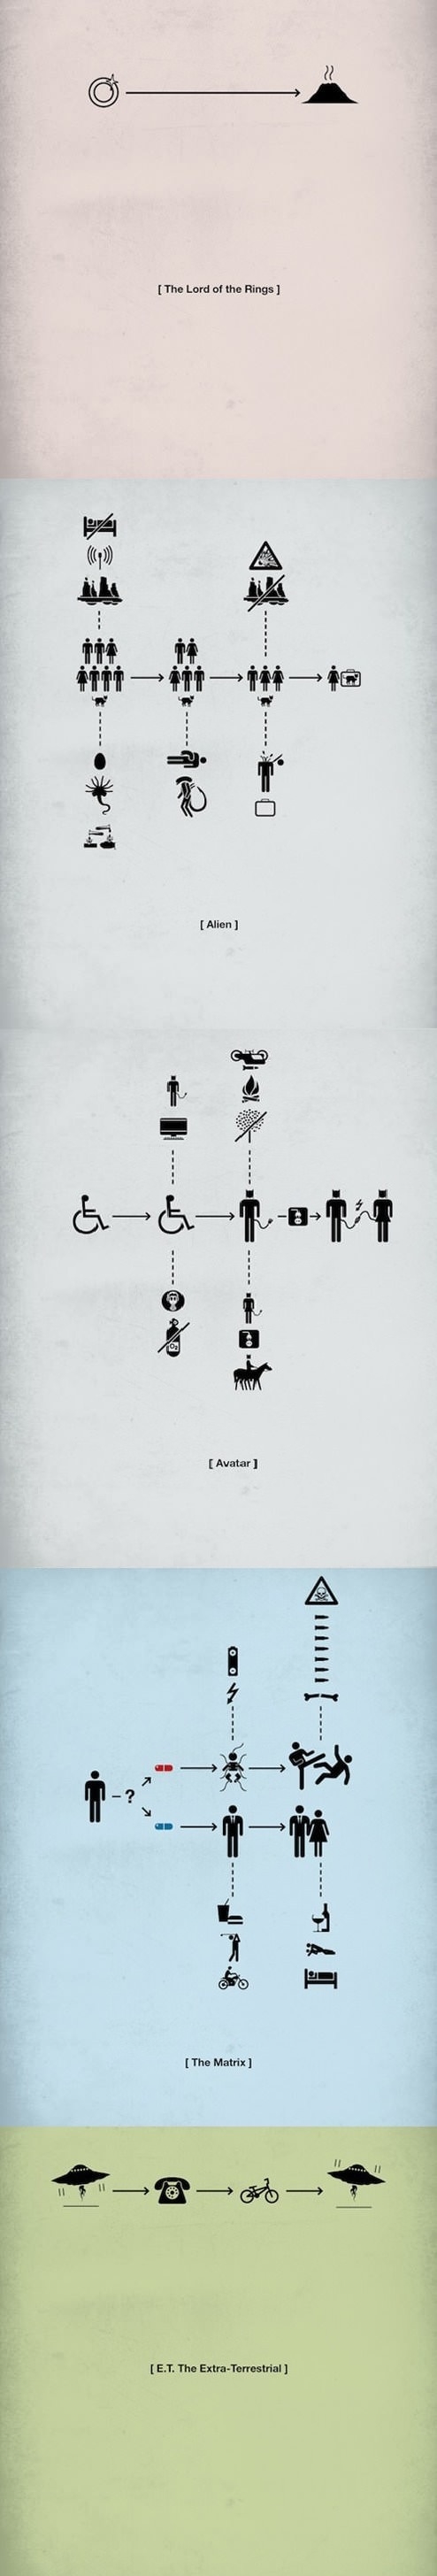 Movies in pictograms